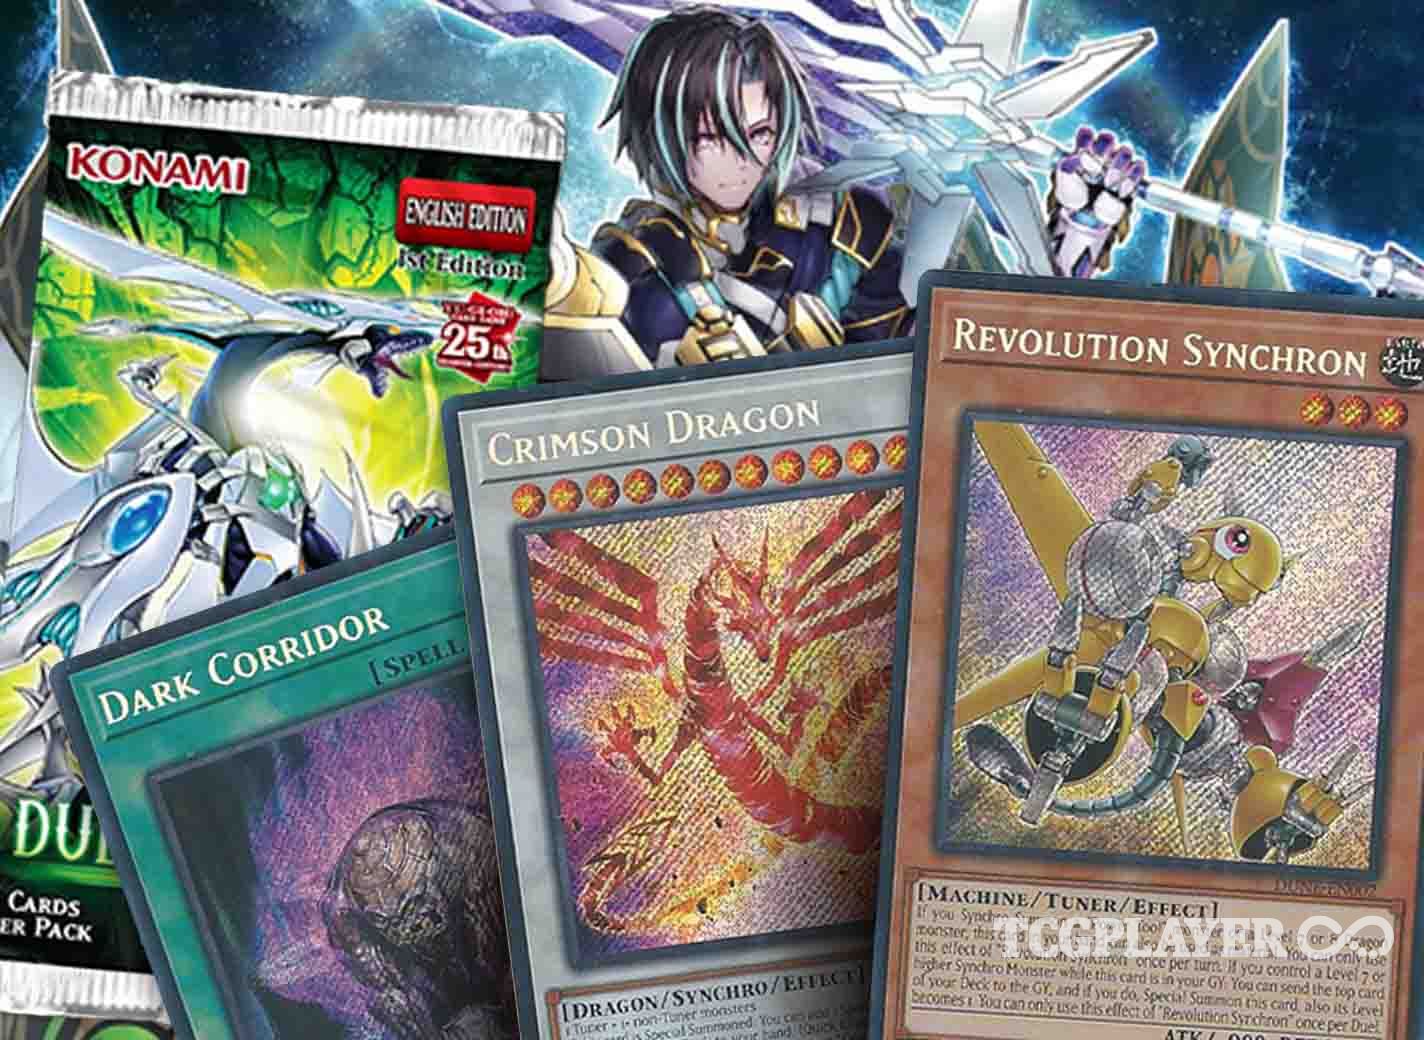 The Top 10 Best Decks From Yu-Gi-Oh! 5D's